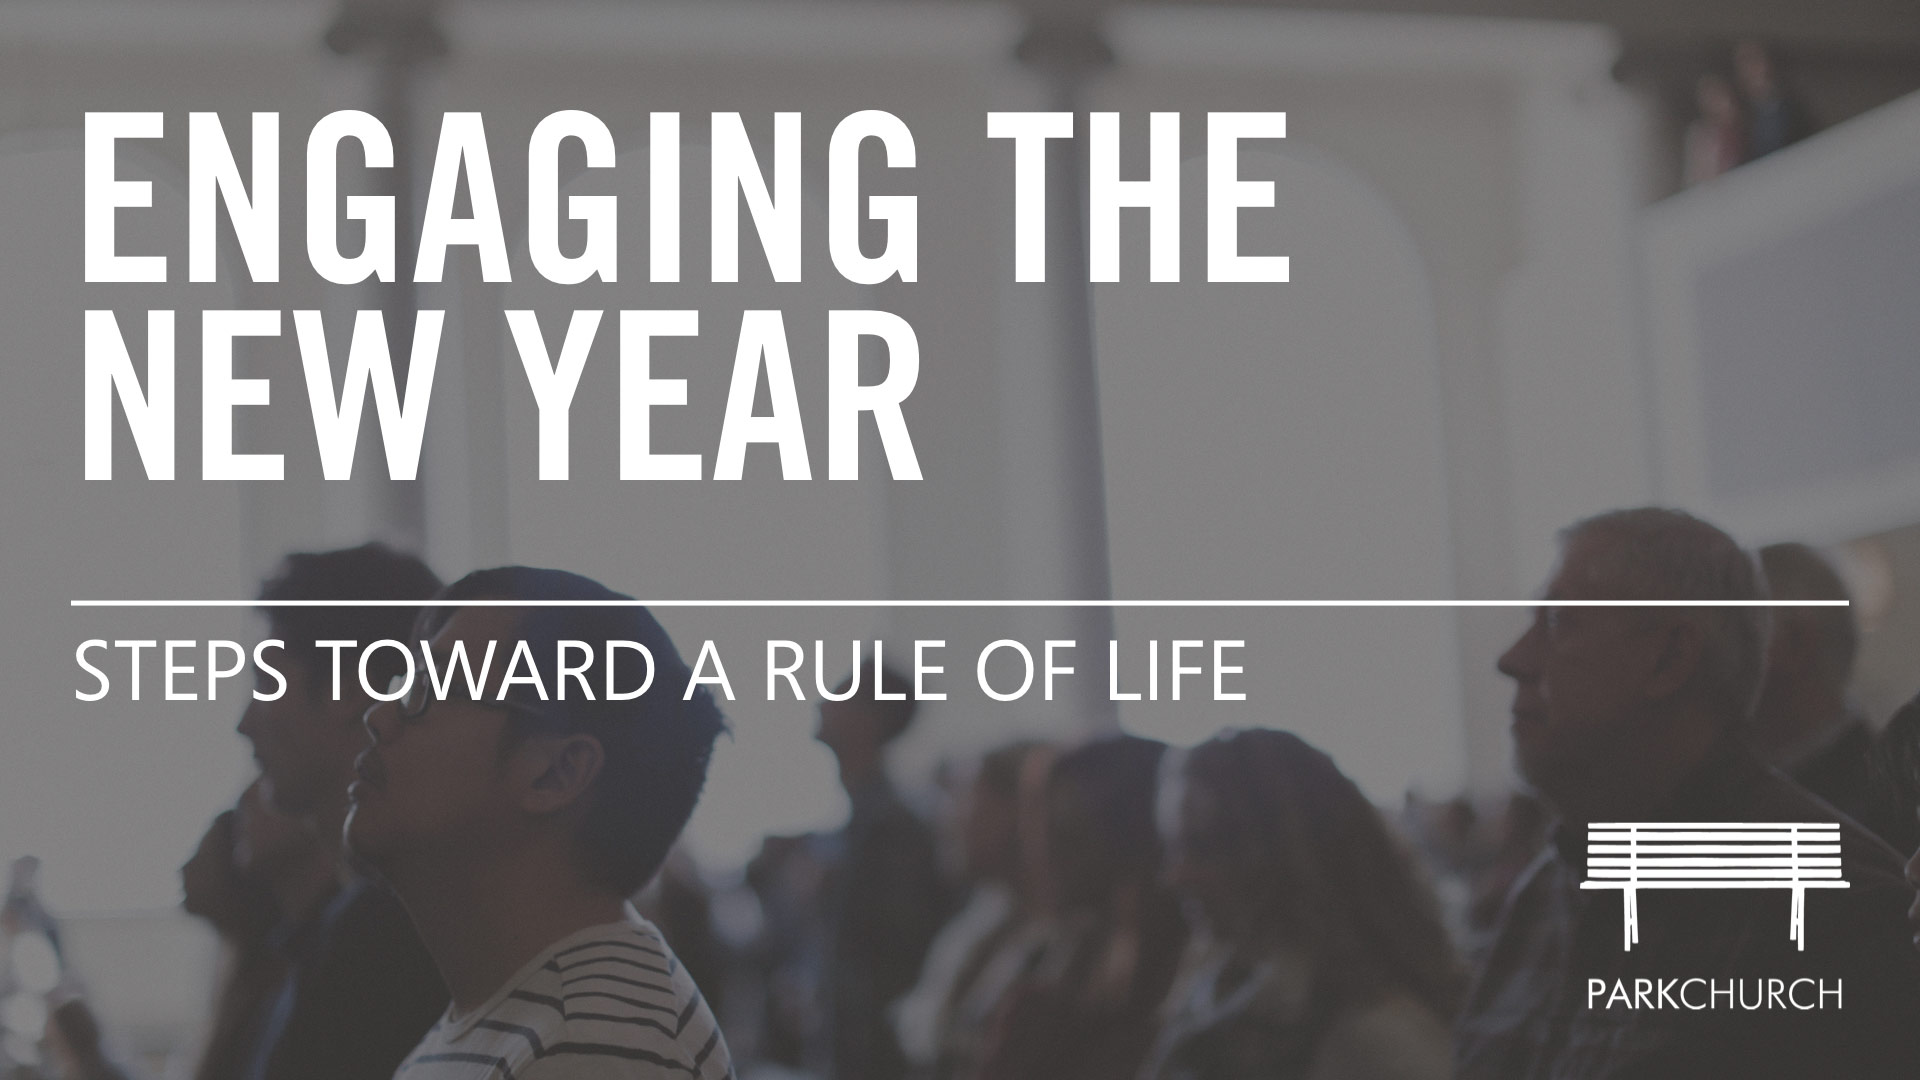 Engaging the New Year: Steps to a Rule of Life